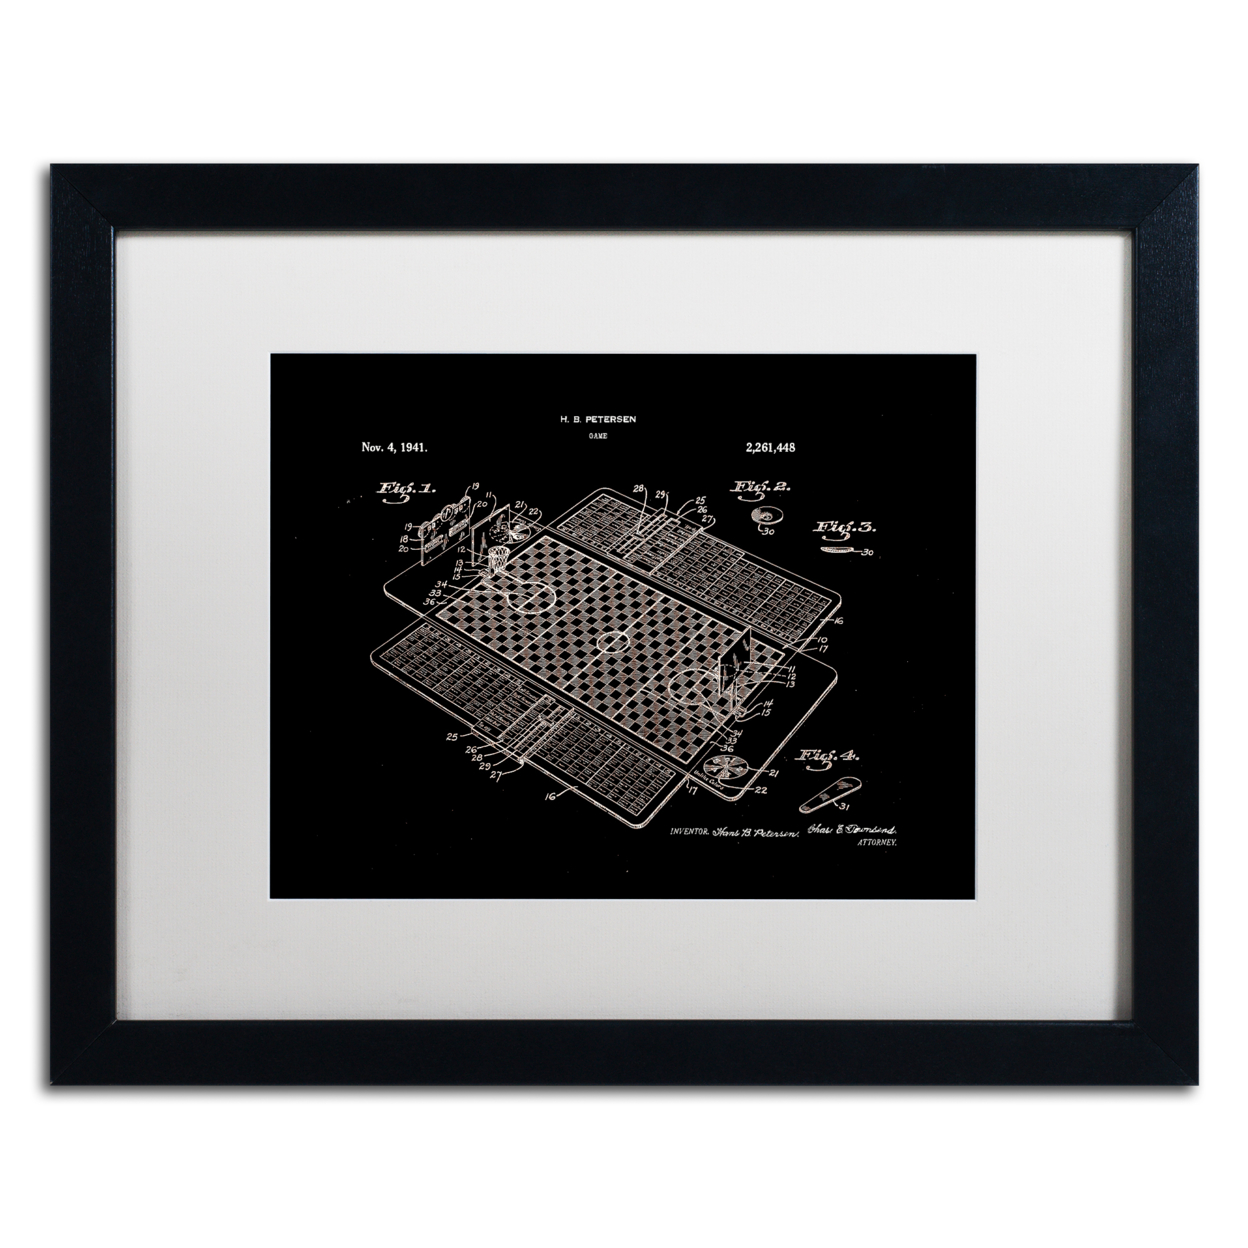 Claire Doherty 'Basketball Court Game Patent Black' Black Wooden Framed Art 18 X 22 Inches